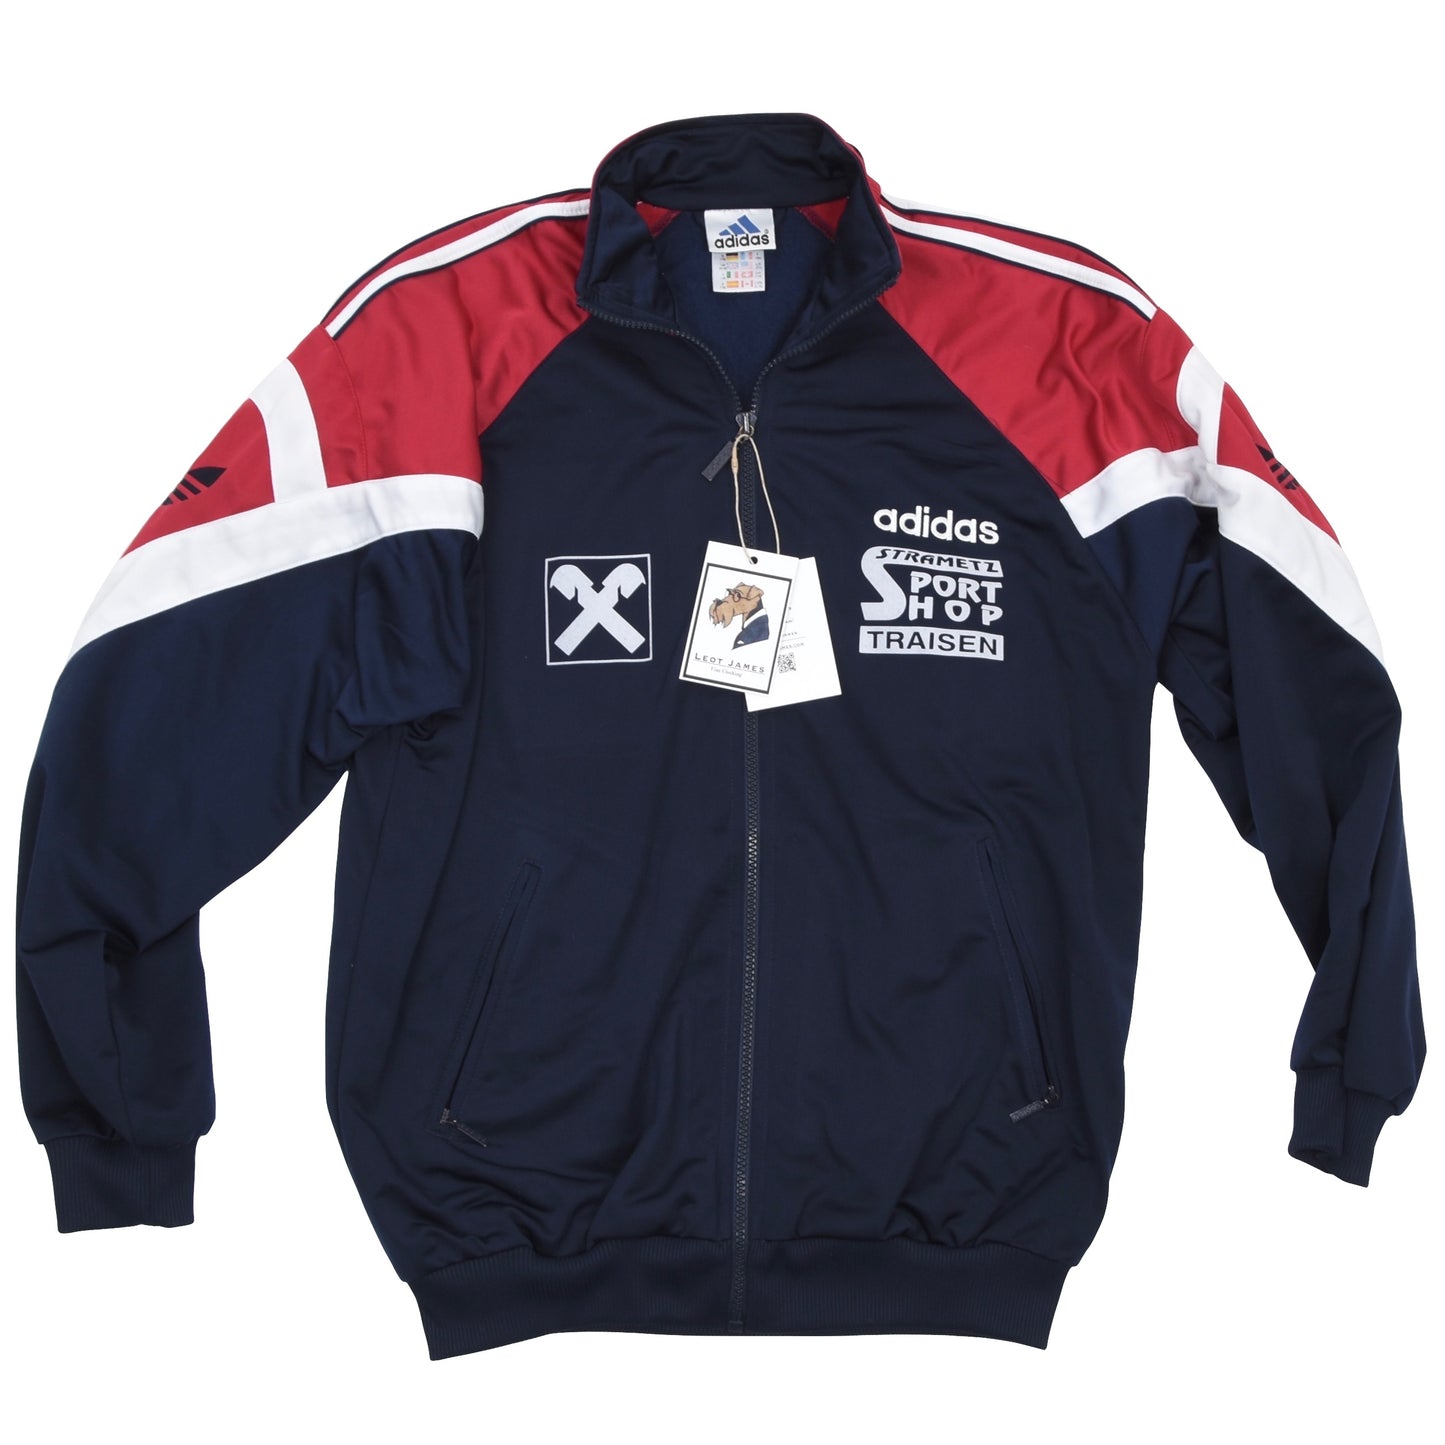 Vintage Adidas Track Suit Size D176 - Navy/Red/White